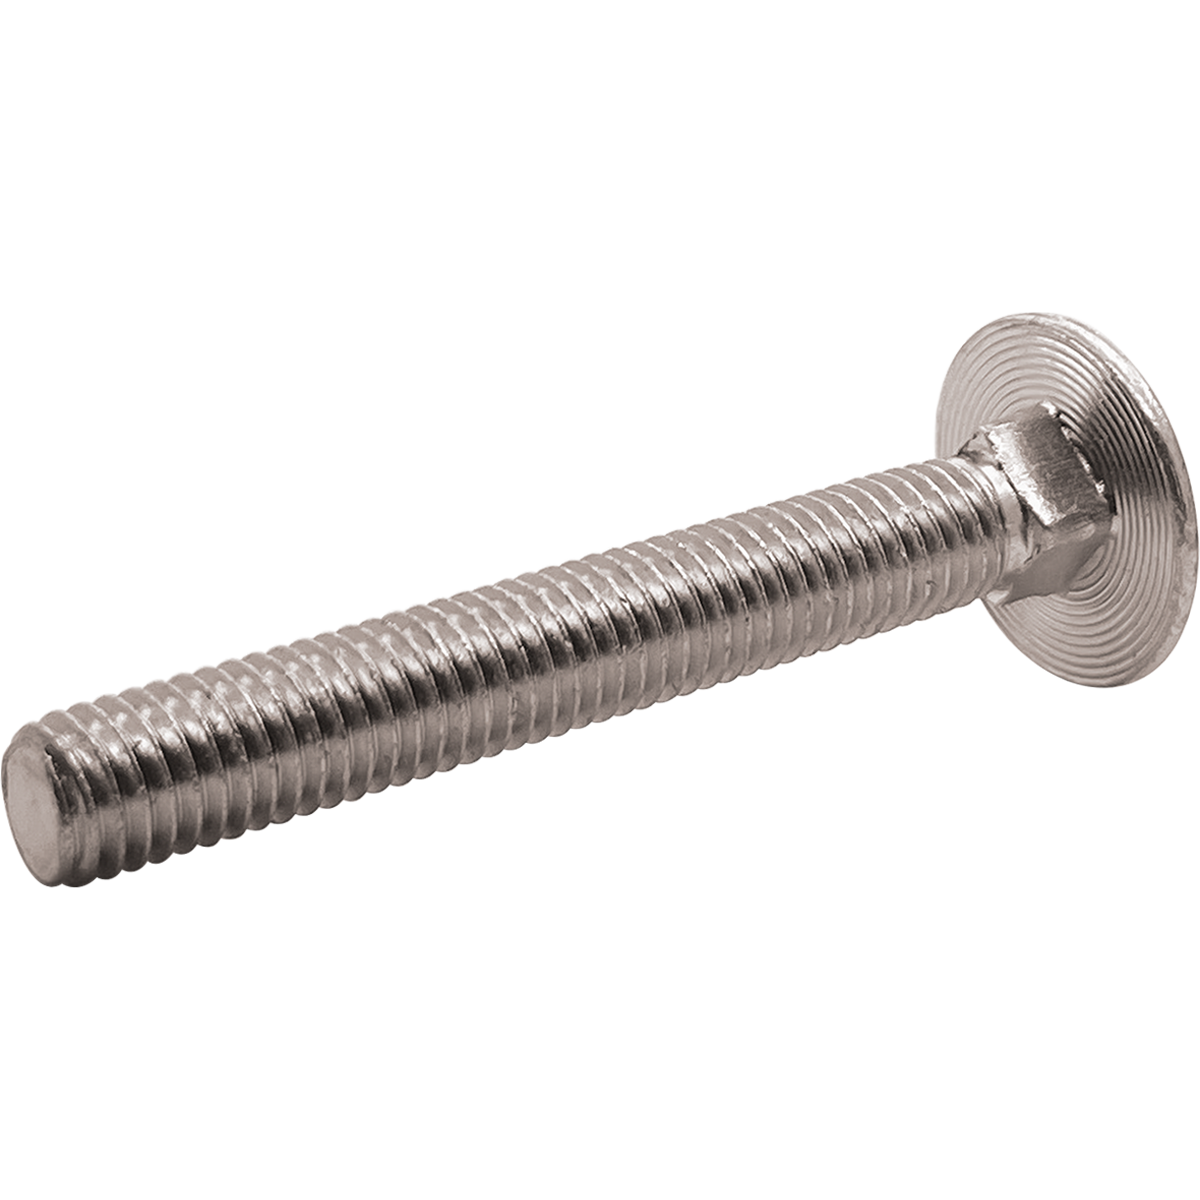 Cup square carriage bolts, known as coach bolts are available in a variety of sizes. at competitive prices.